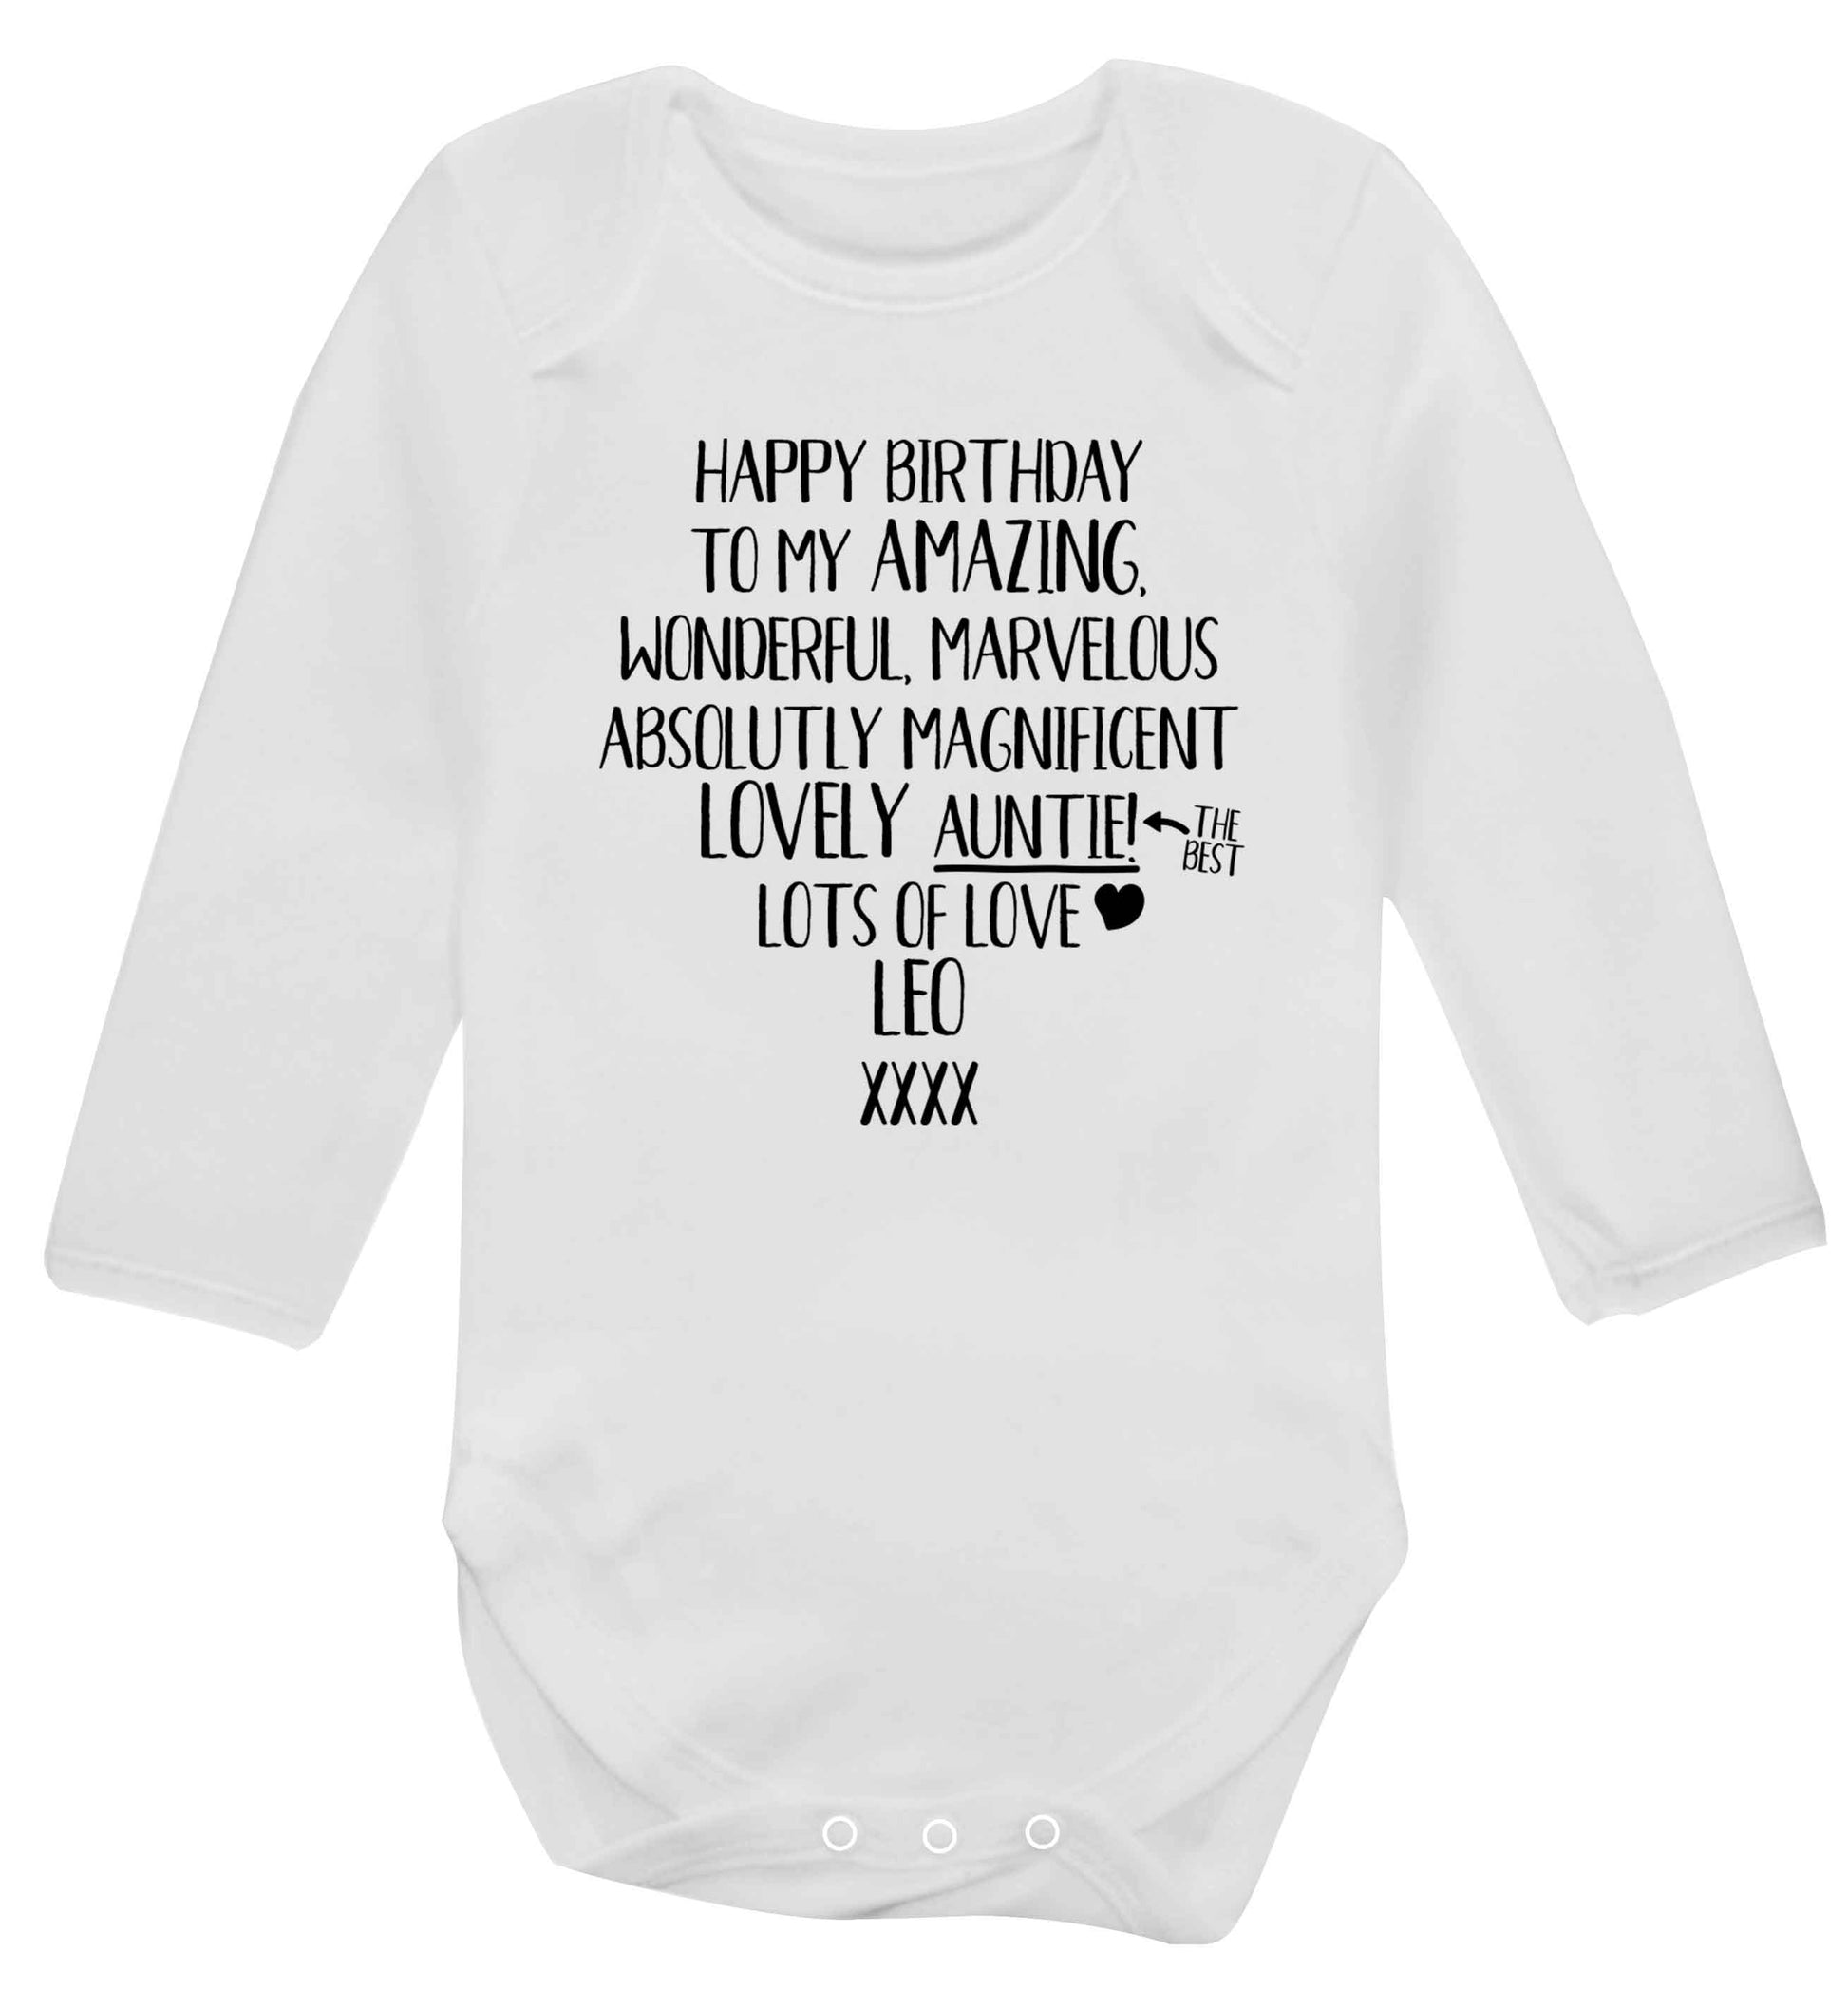 Personalised happy birthday to my amazing, wonderful, lovely auntie Baby Vest long sleeved white 6-12 months